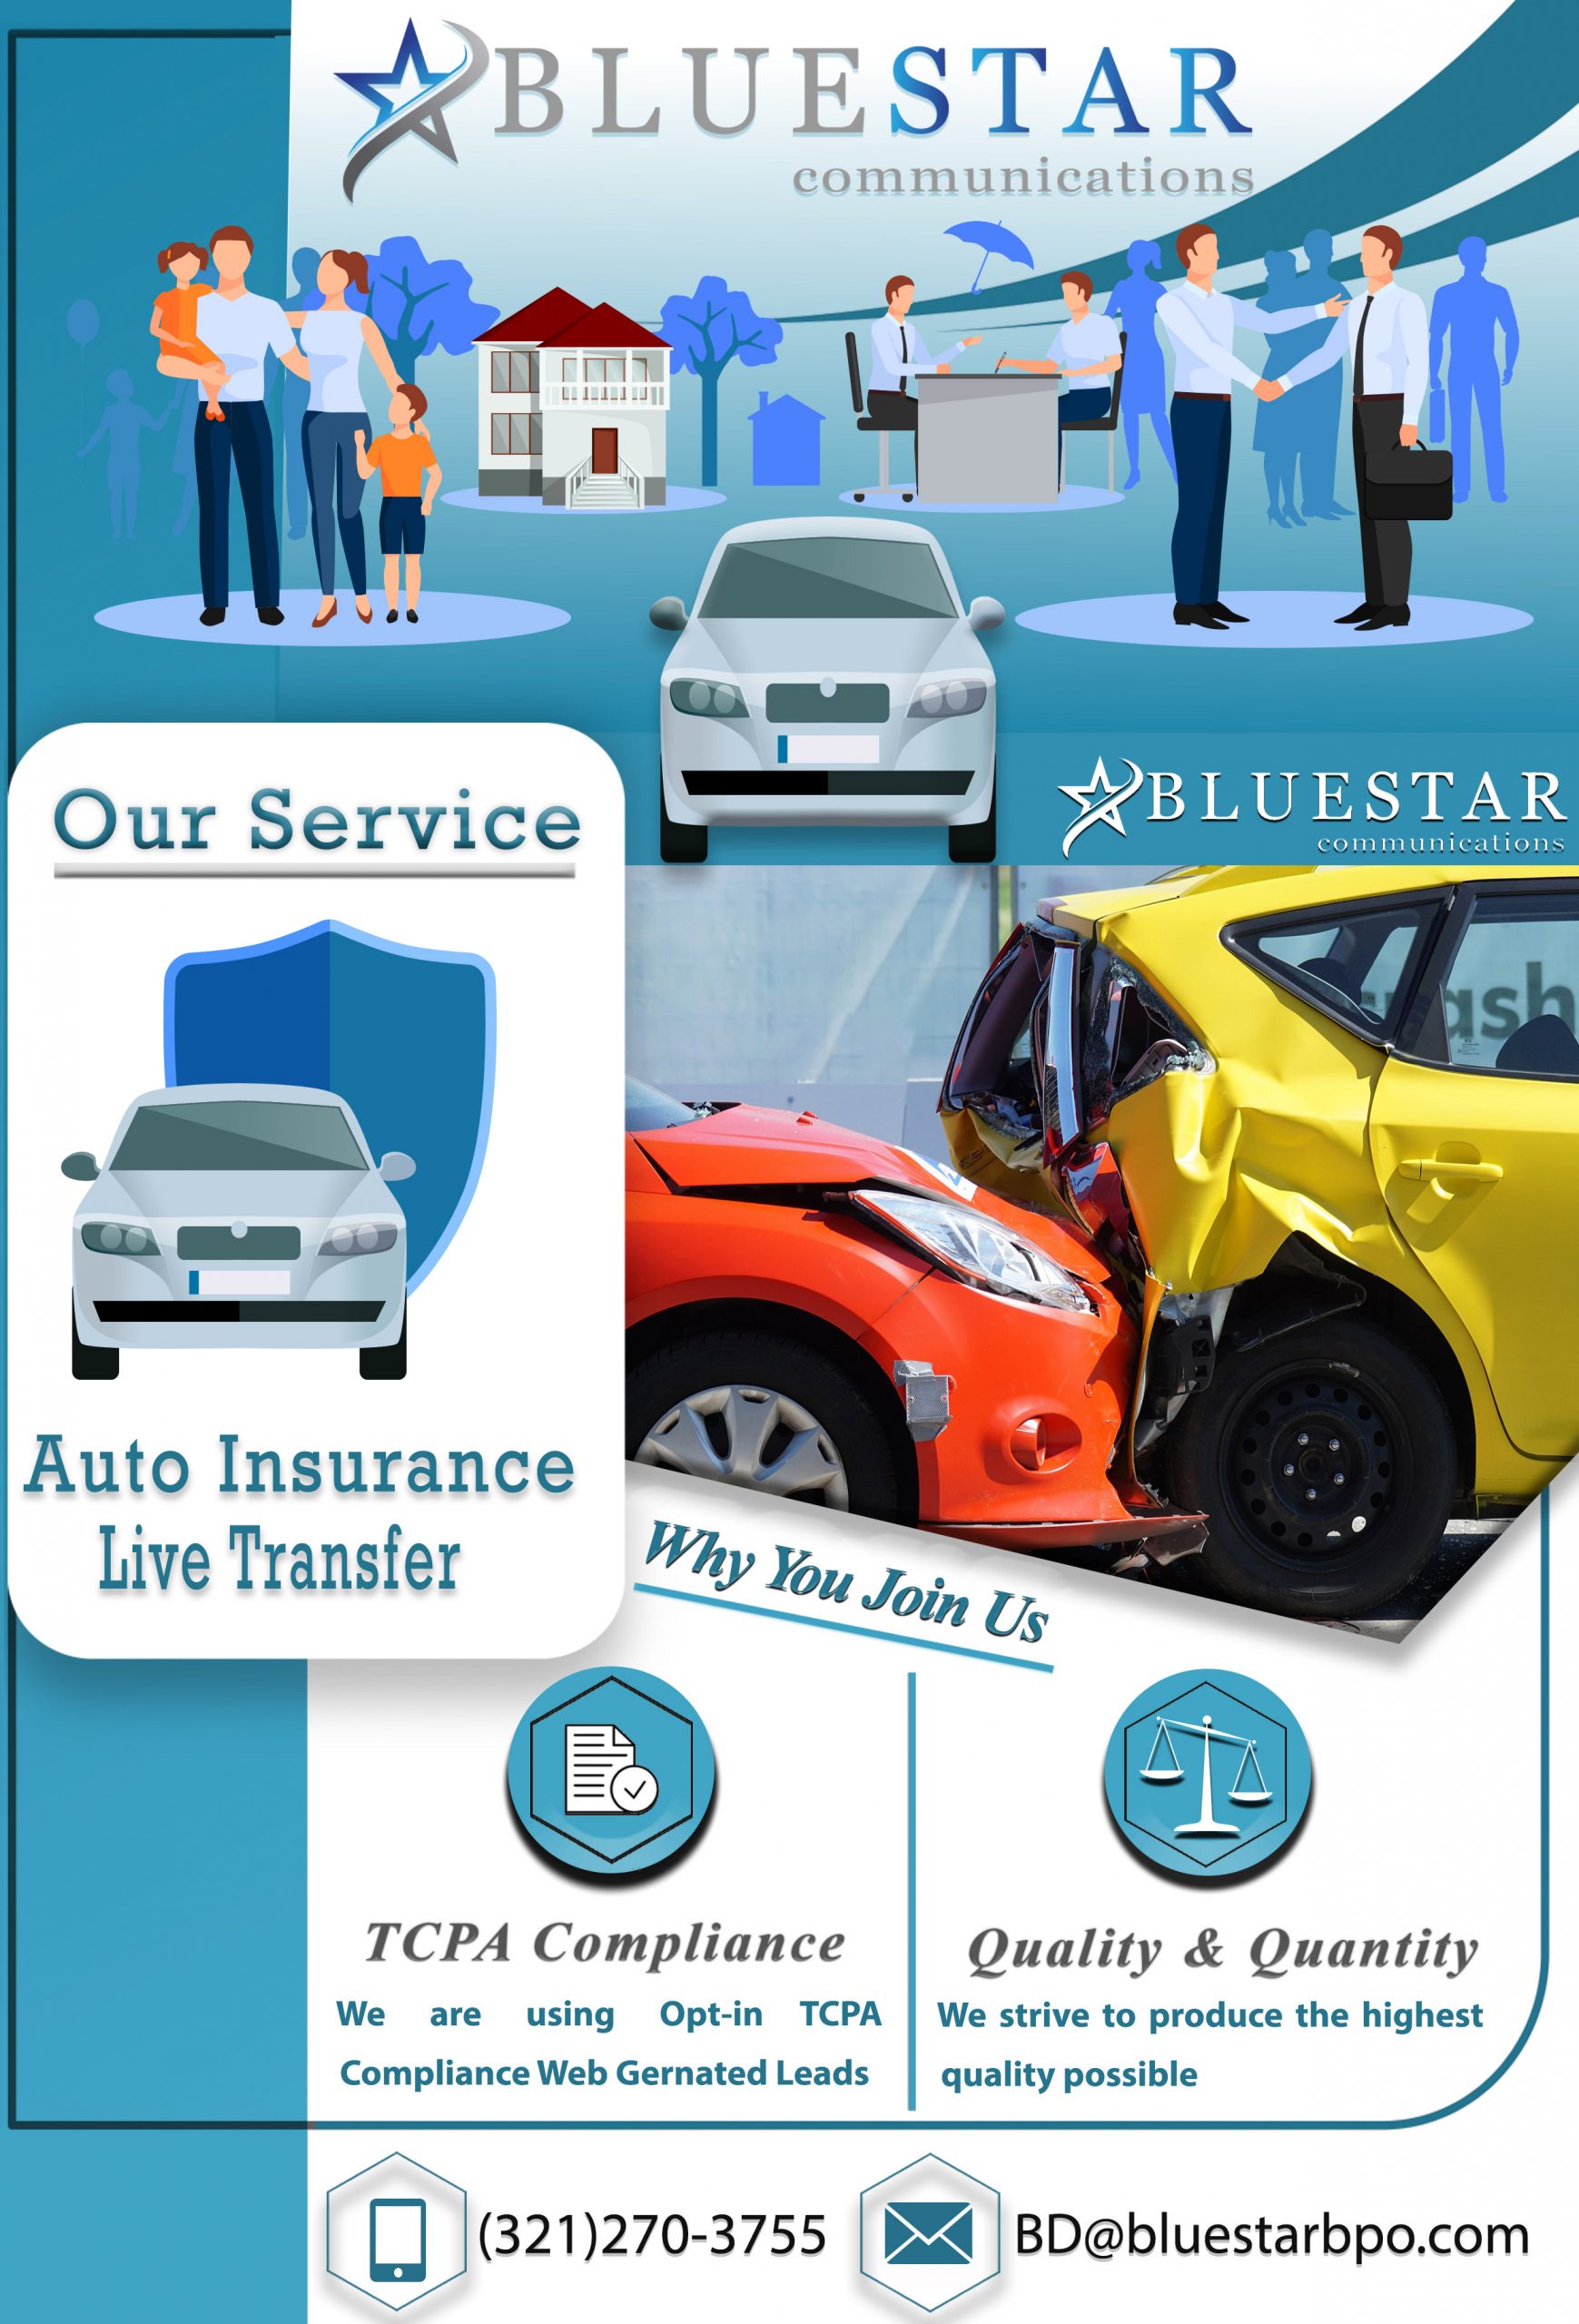 Insurance Projects Photos Videos Logos Illustrations within dimensions 2480 X 3650